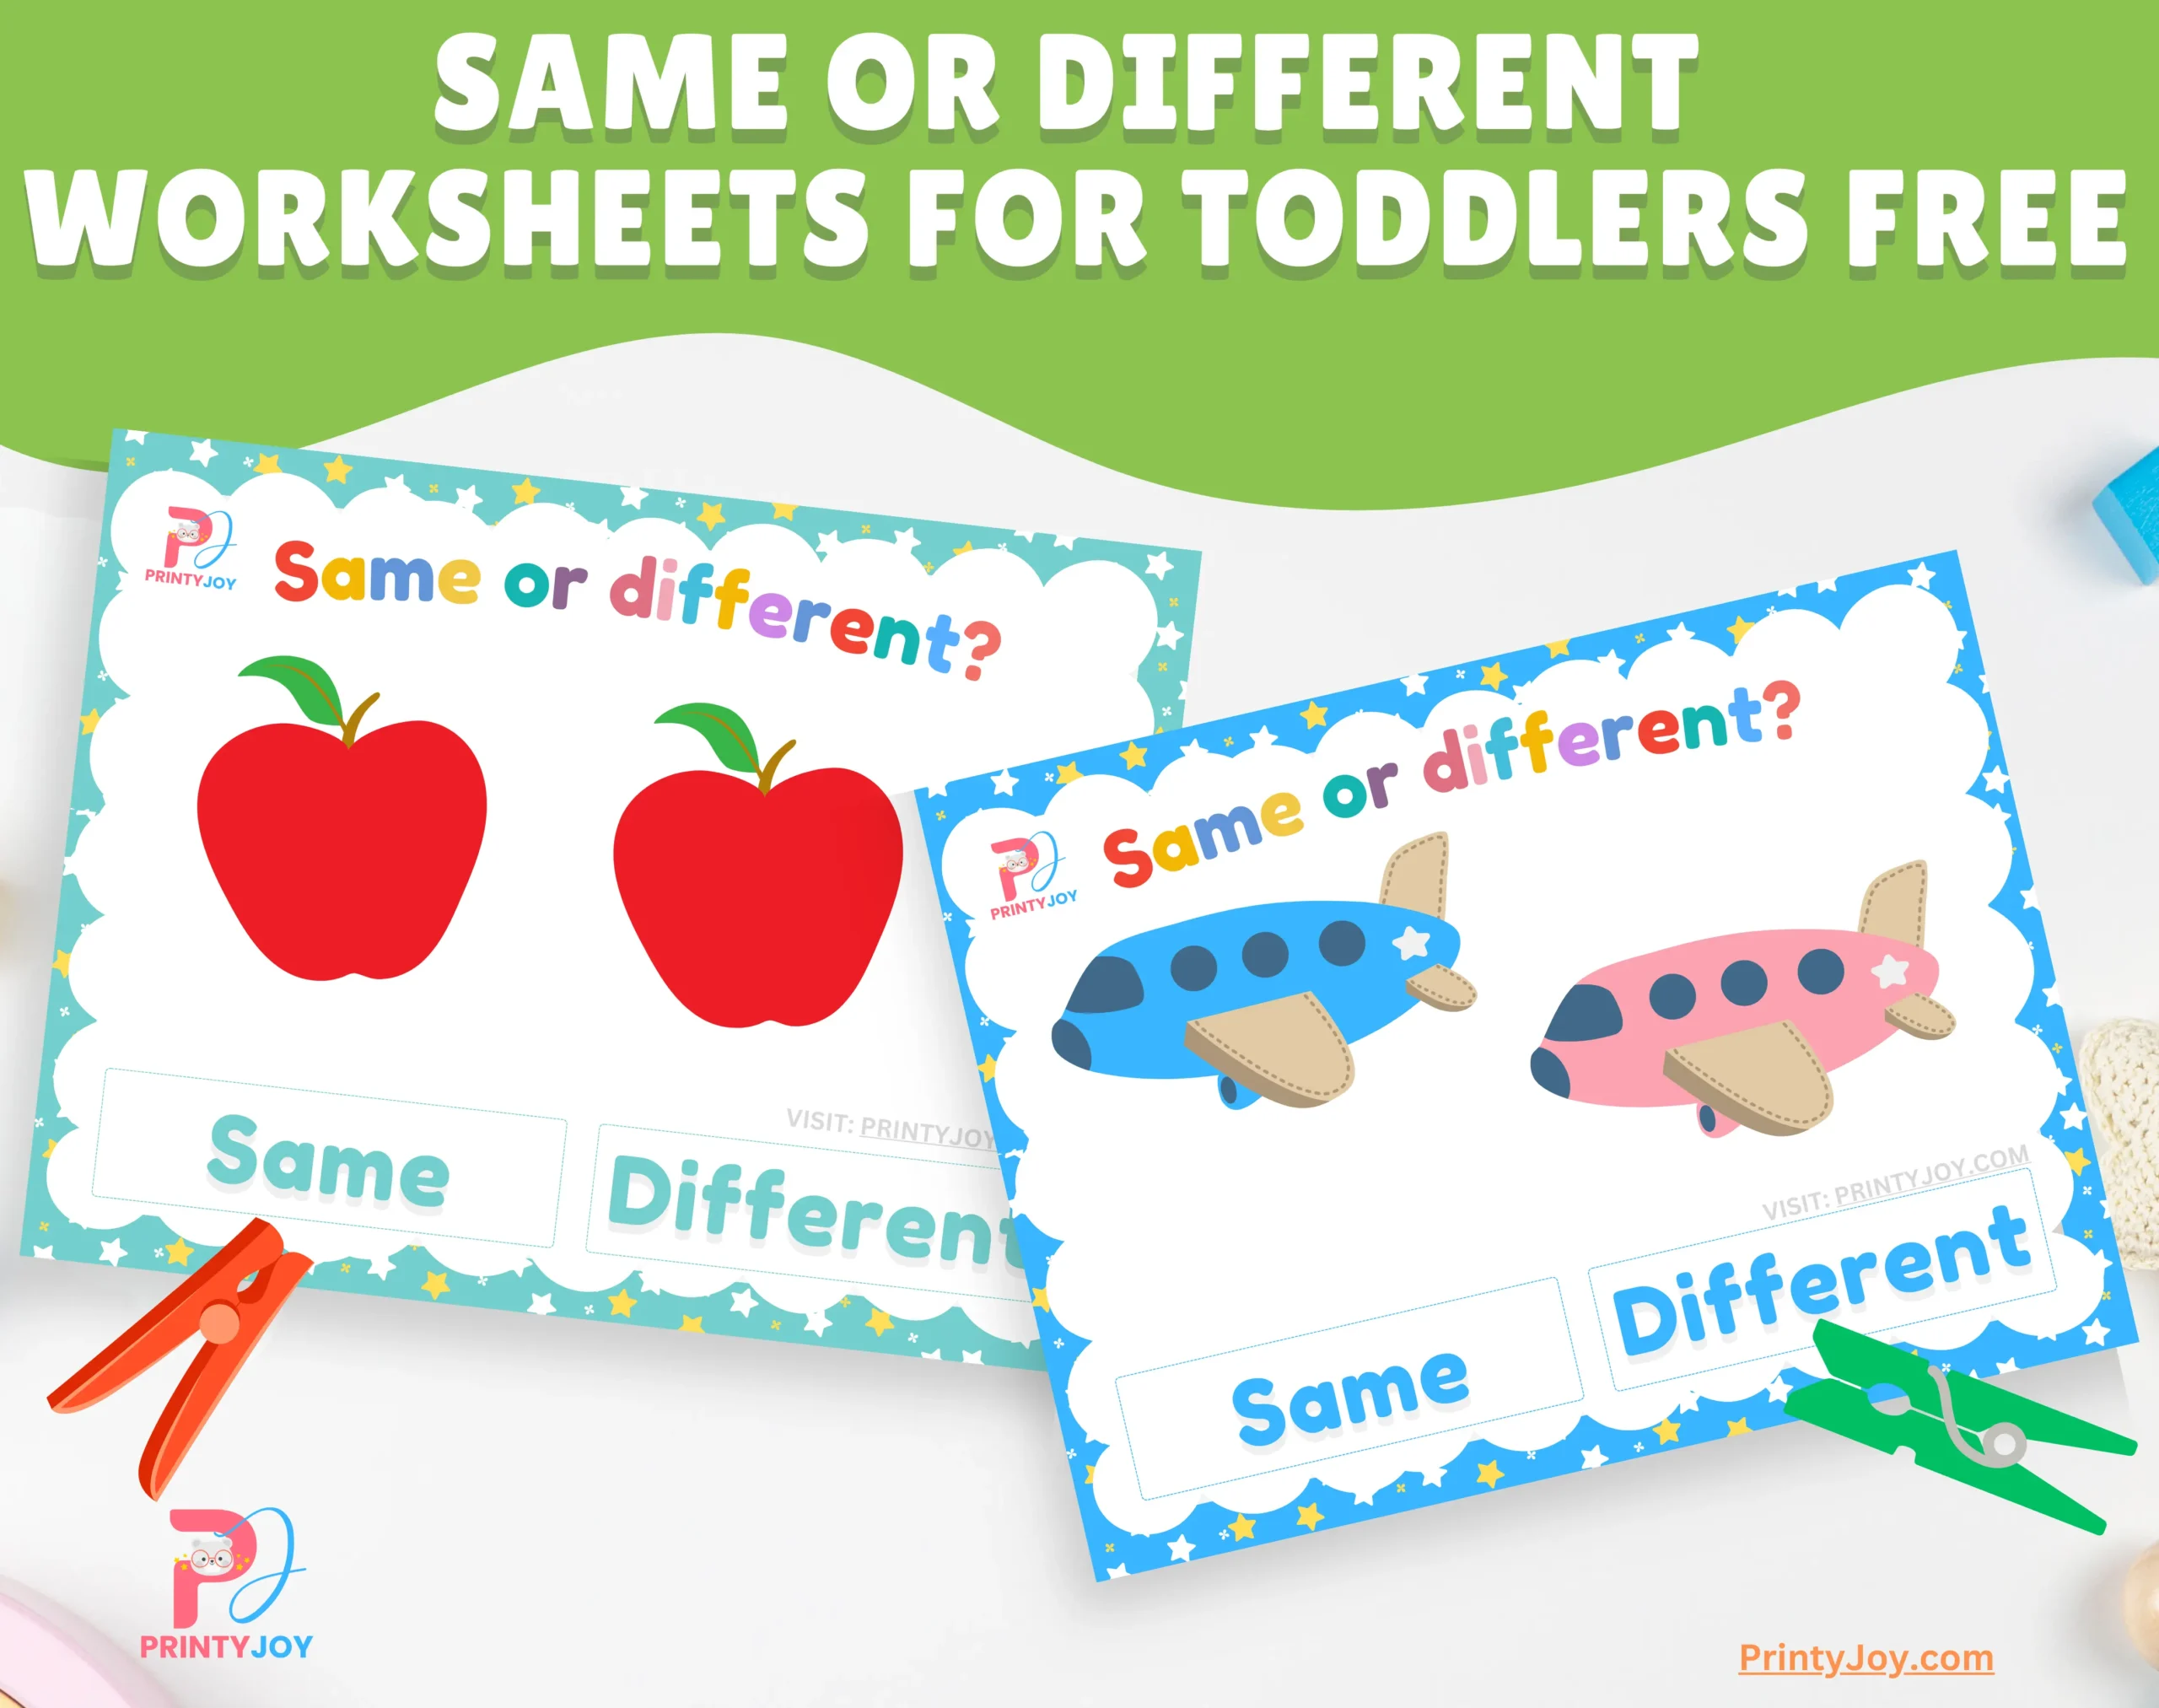 Same or Different Worksheets for Toddlers Free